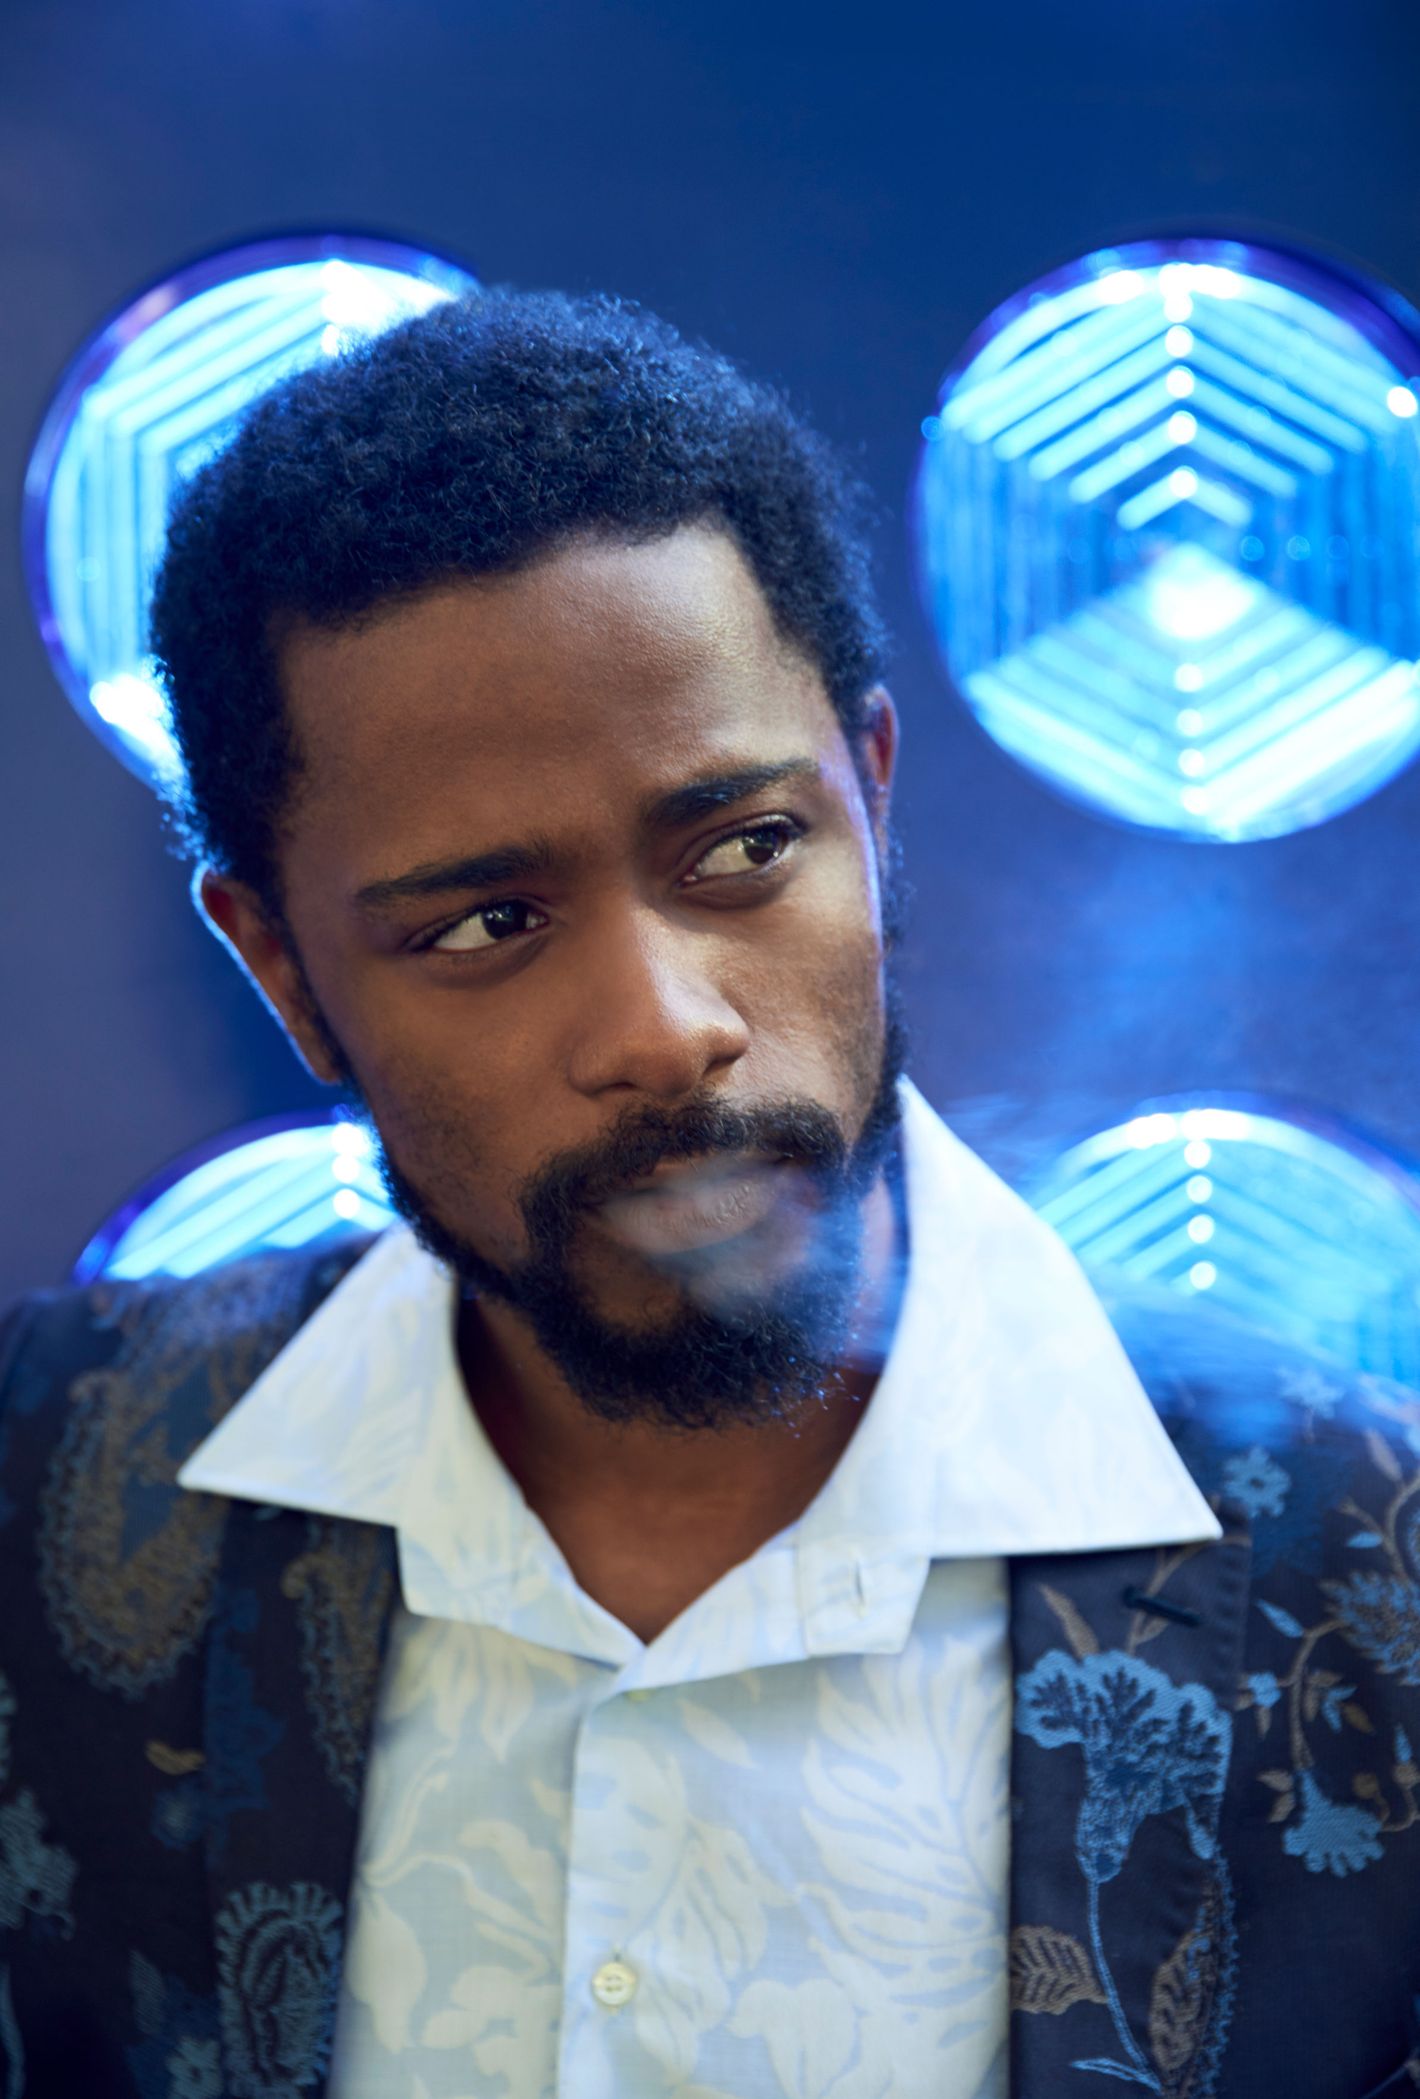 Keith Stanfield smoking a cigarette (or weed)
